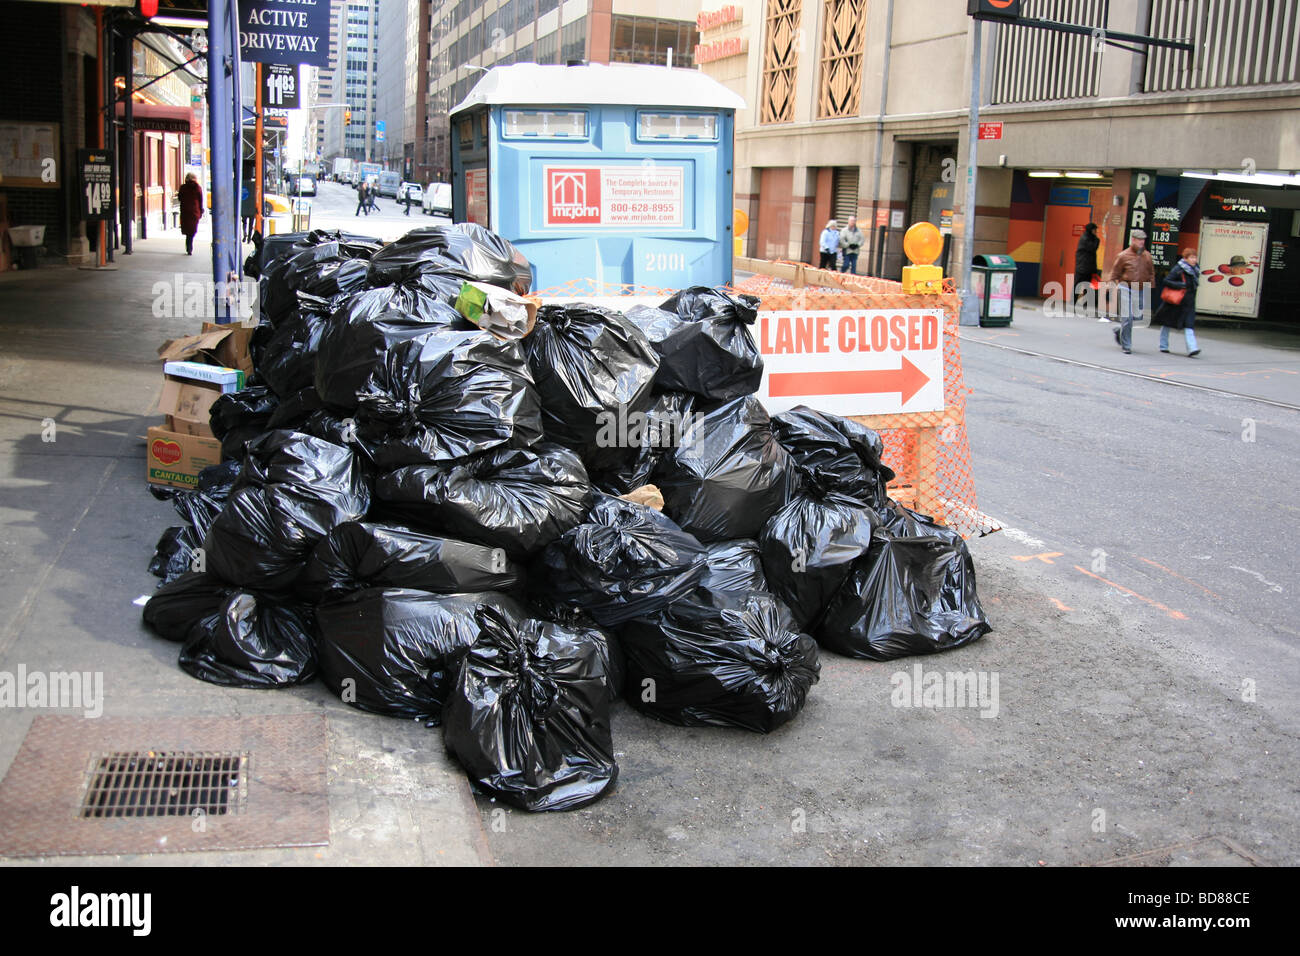 https://c8.alamy.com/comp/BD88CE/pile-of-trash-in-plastic-bags-awaiting-garbage-collection-on-a-street-BD88CE.jpg